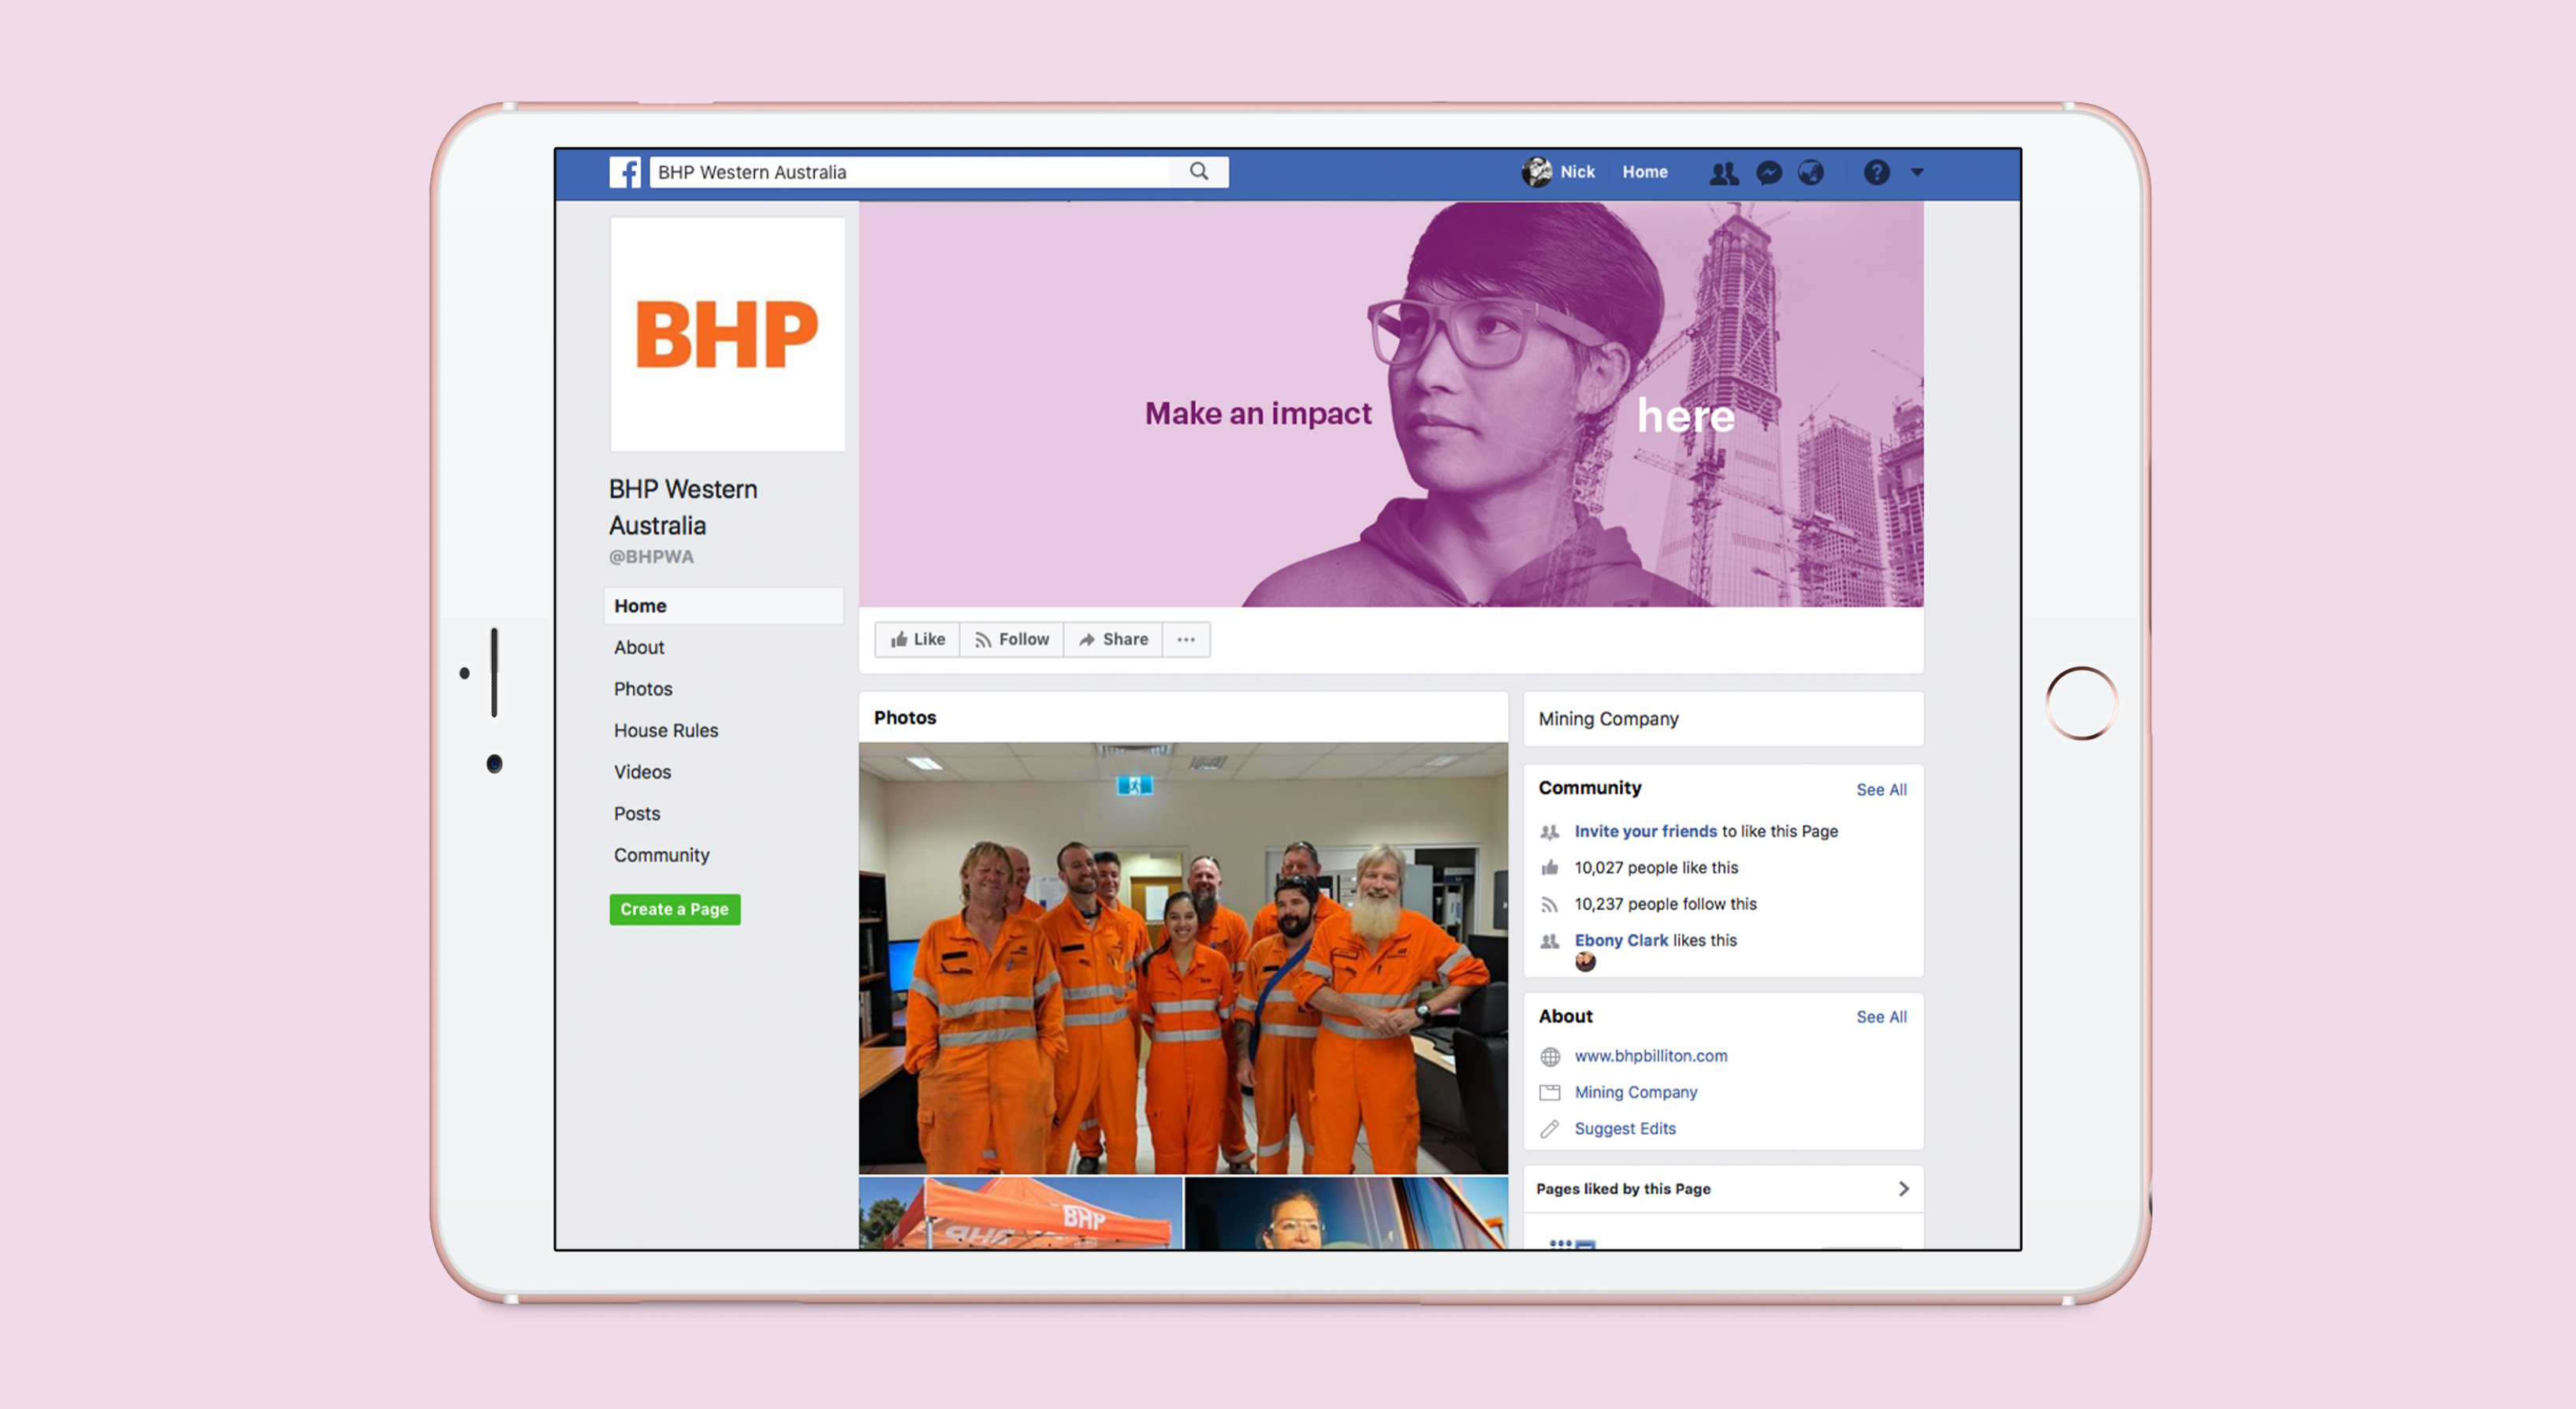 BHP Western Australia Facebook page shown on a tablet screen.